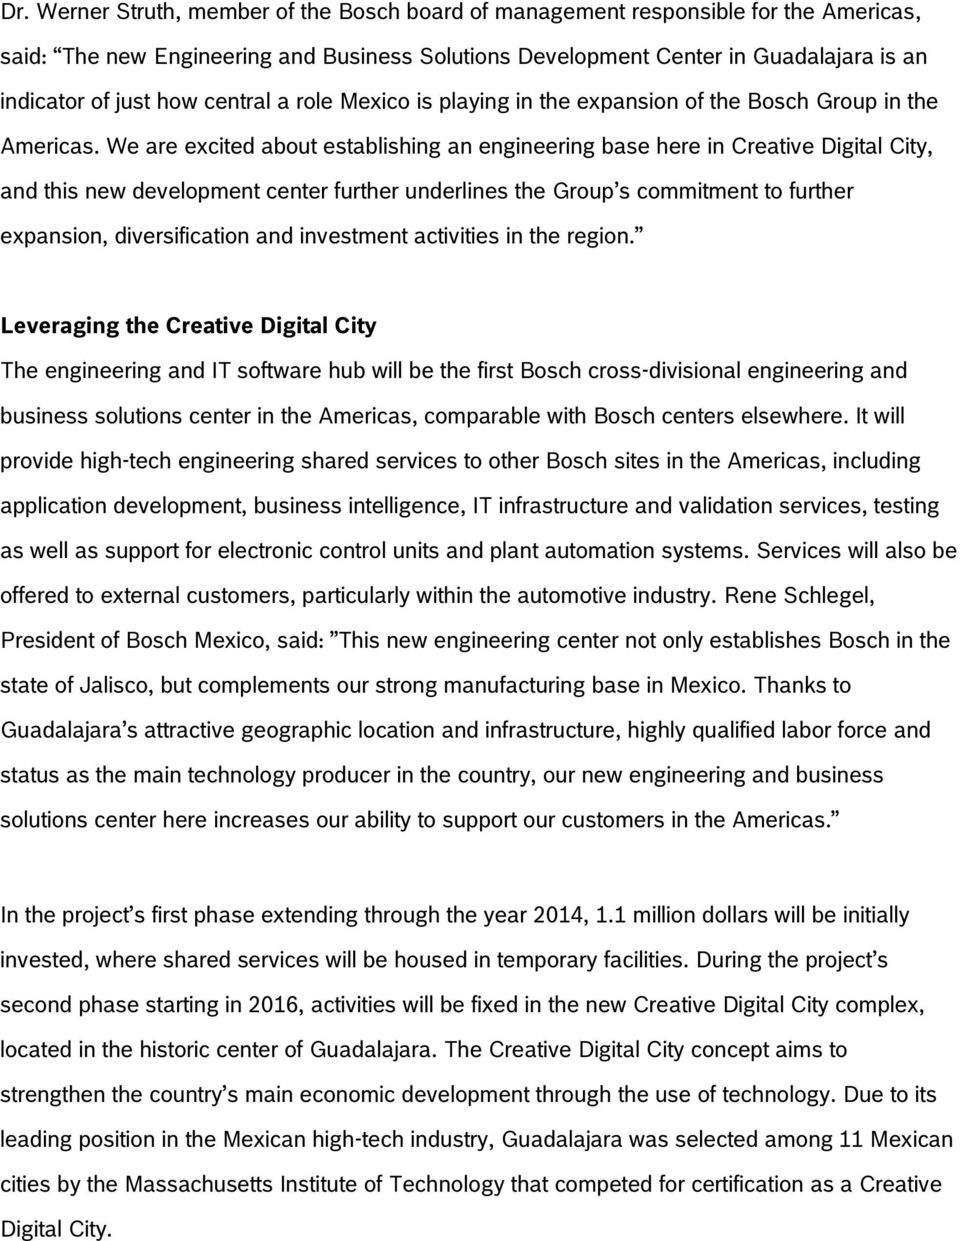 We are excited about establishing an engineering base here in Creative Digital City, and this new development center further underlines the Group s commitment to further expansion, diversification